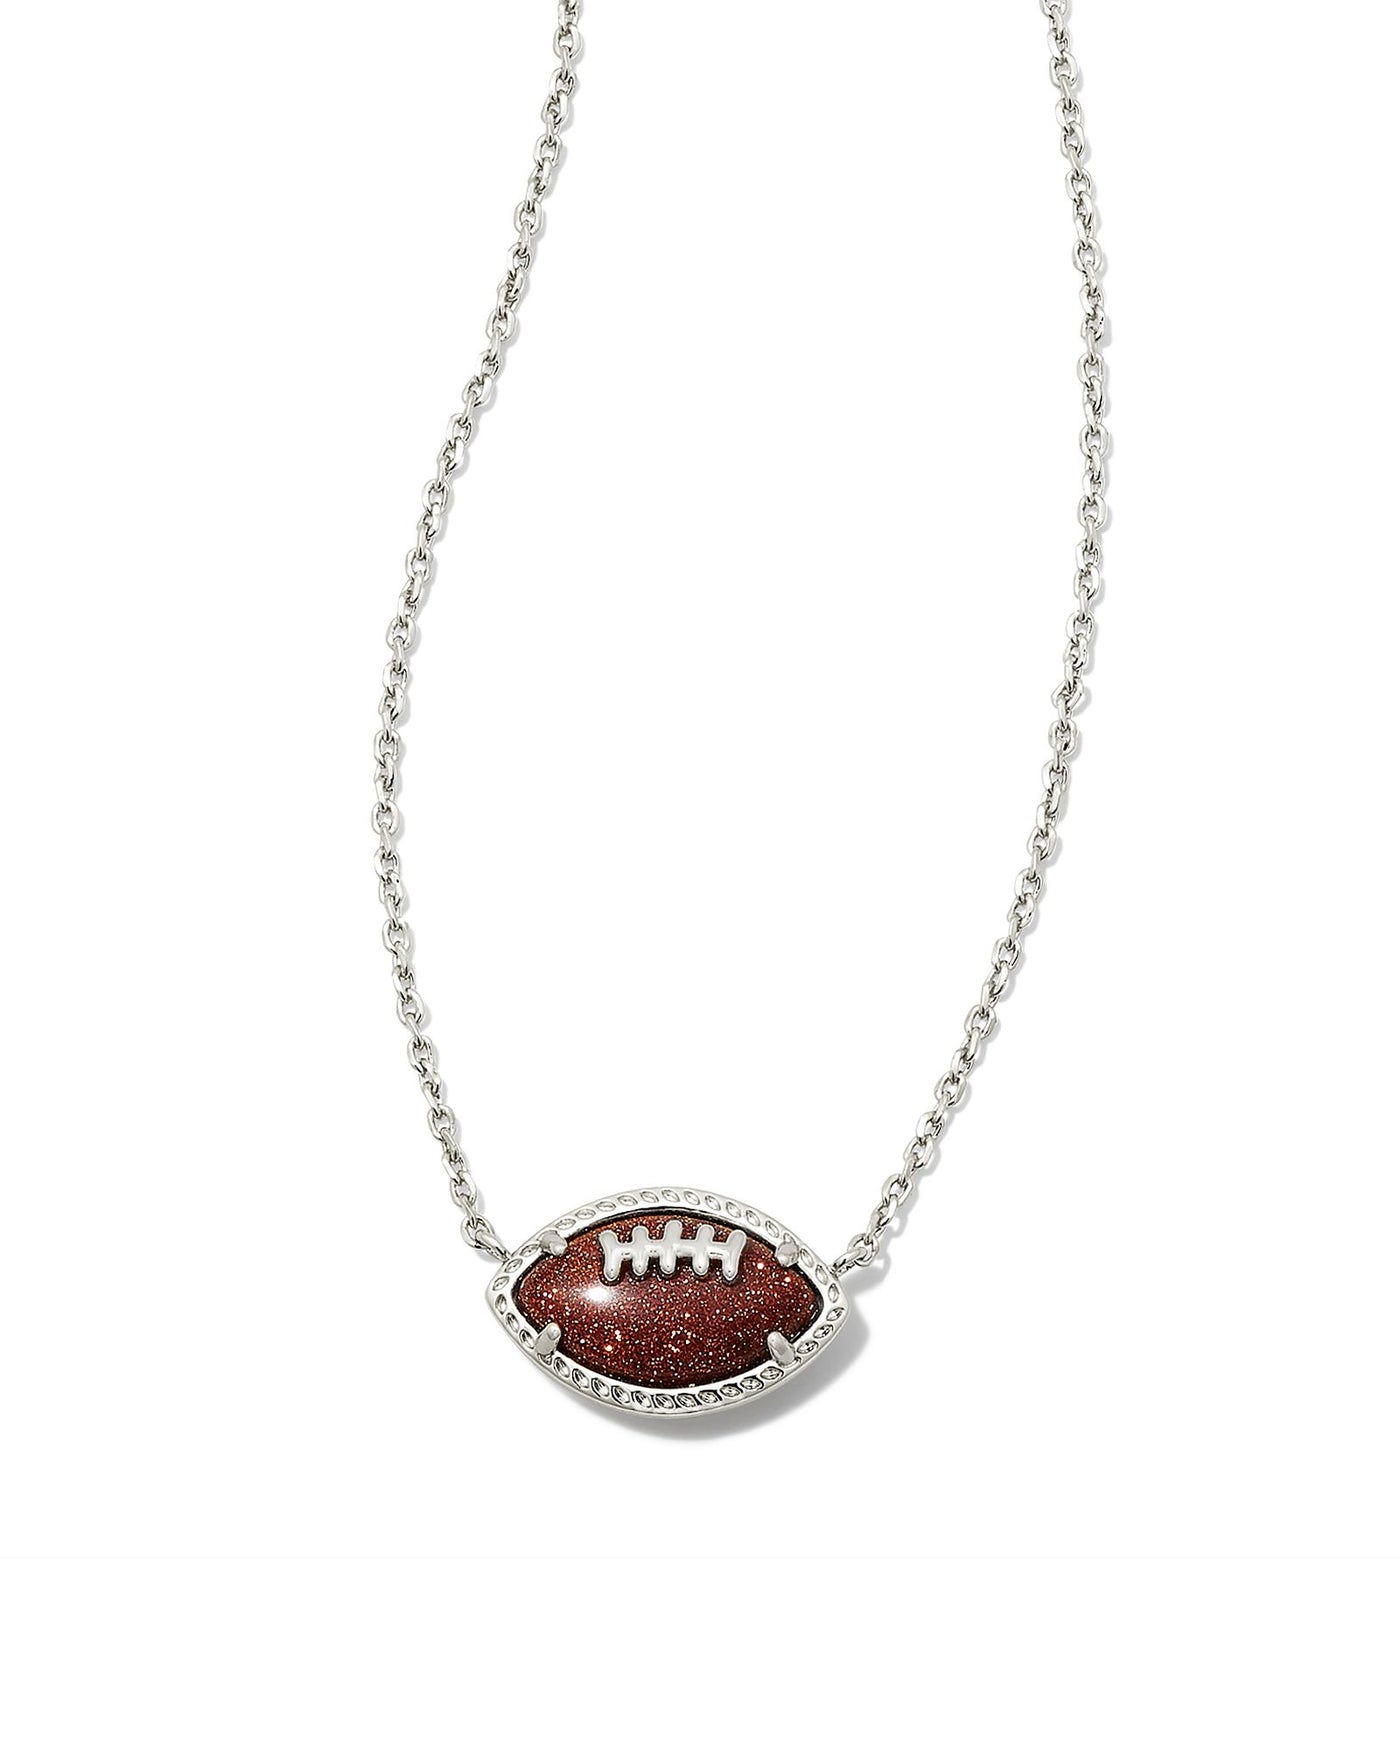 Kendra Scott Football Pendant Necklace in Silver close up.